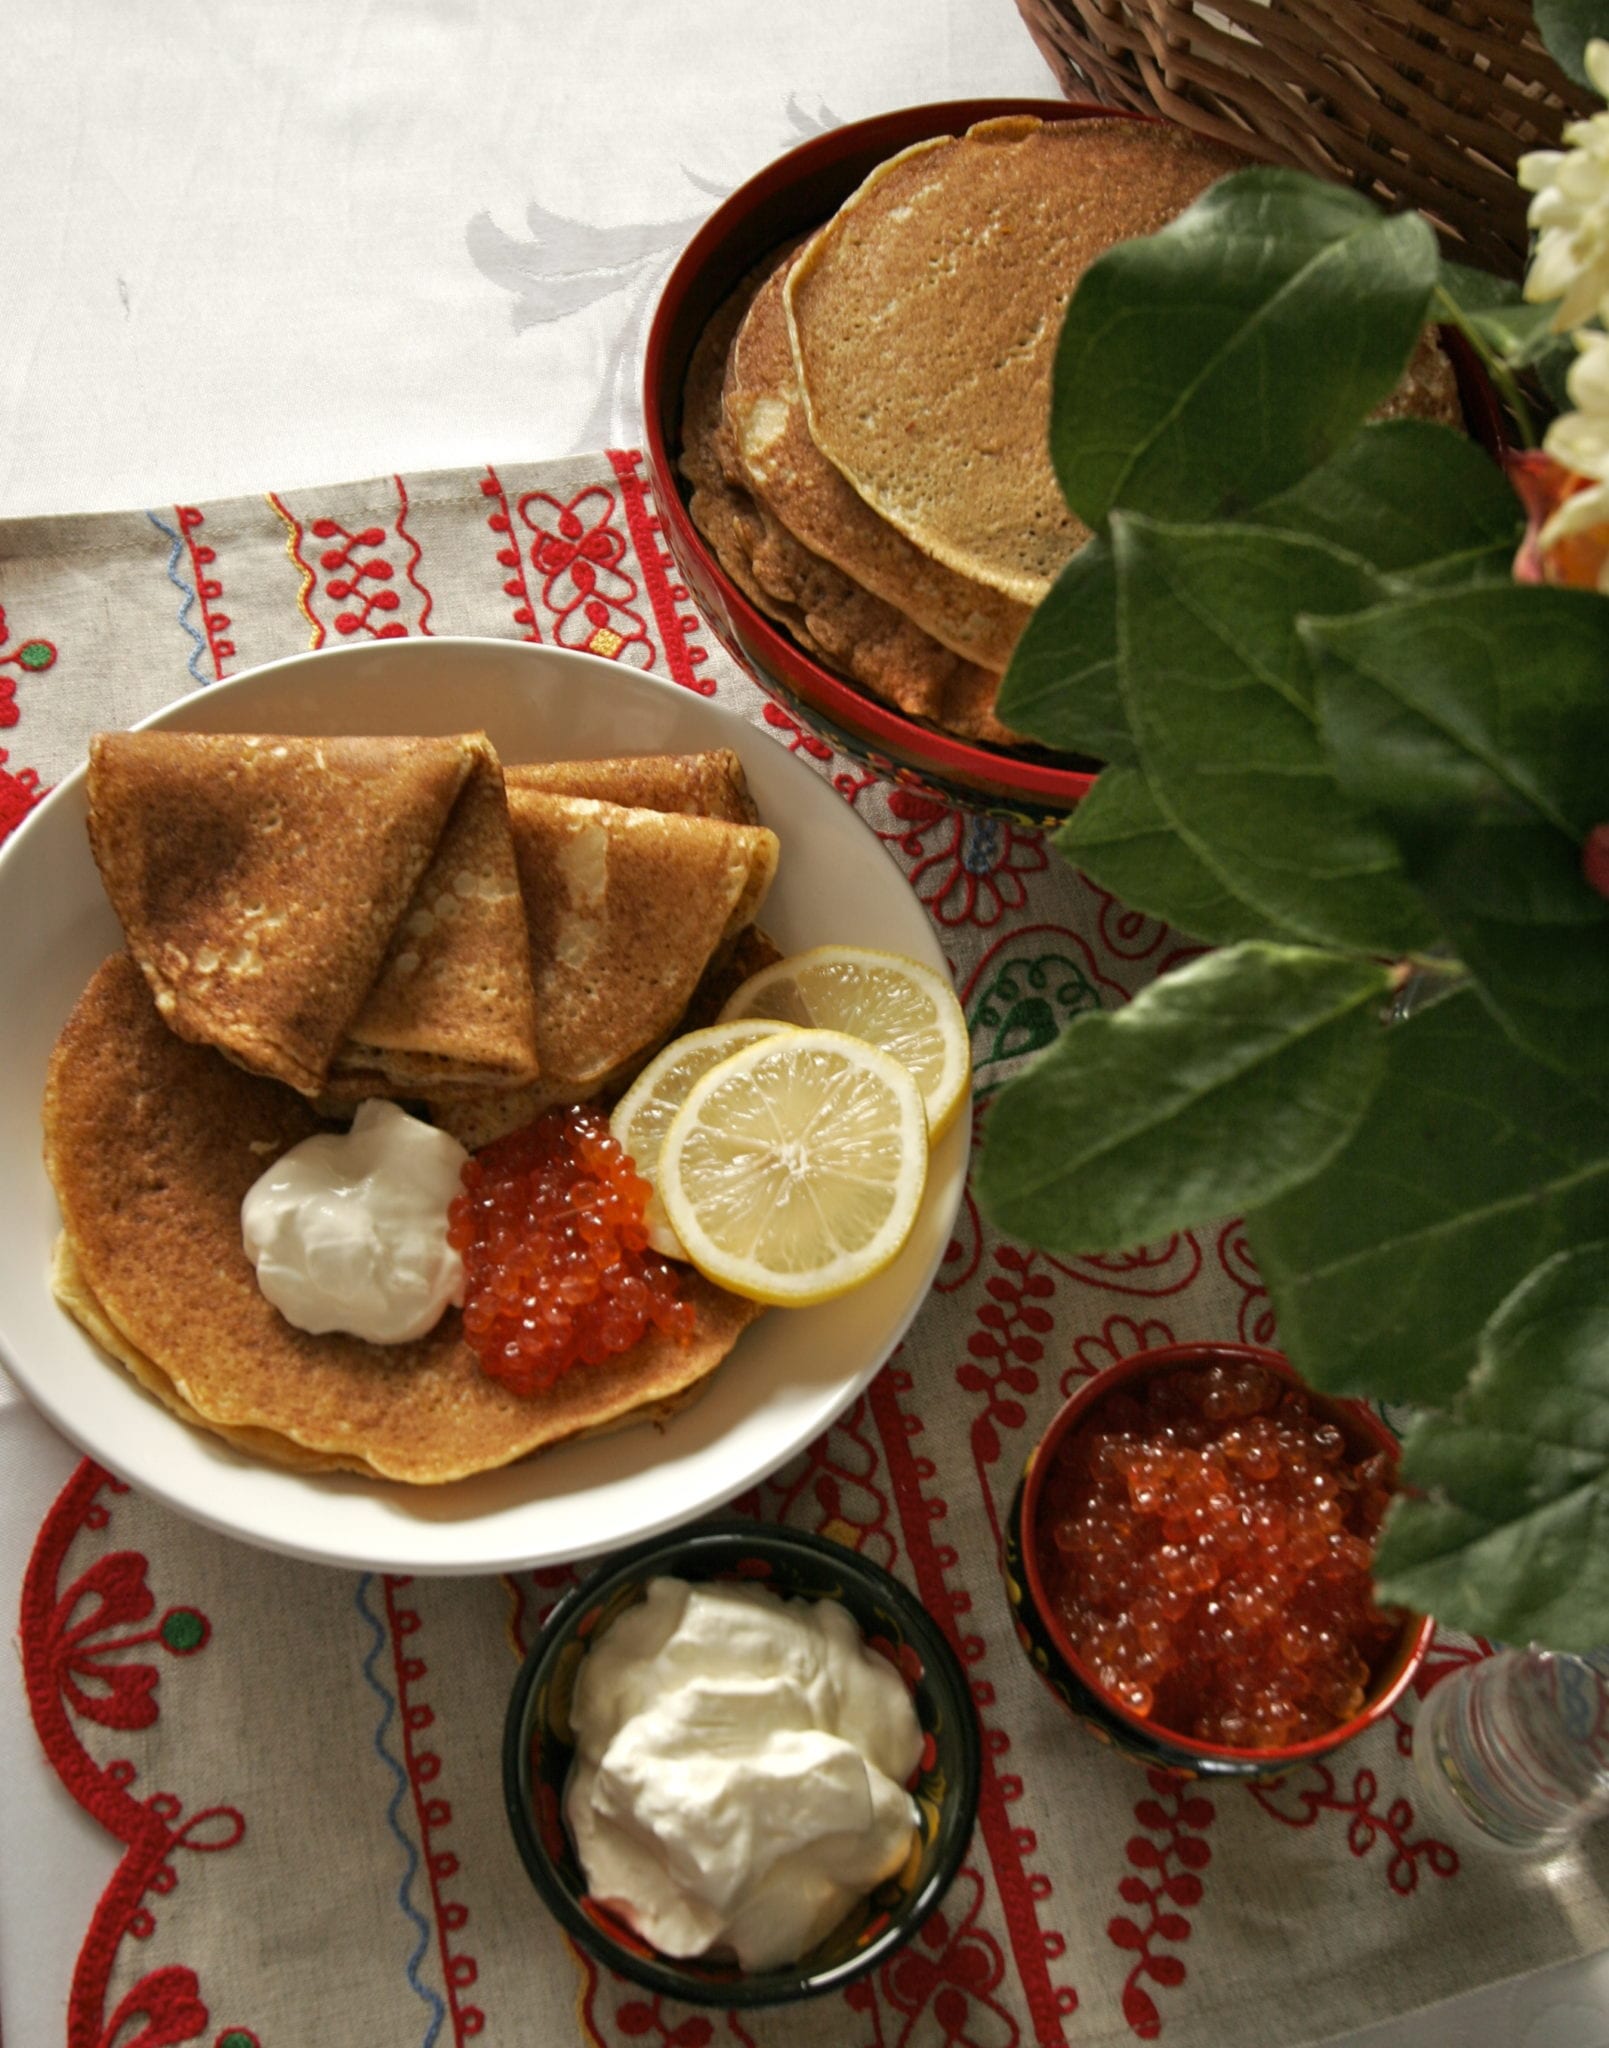 Blinis - Incredibly good Russian pancakes - serve with ro